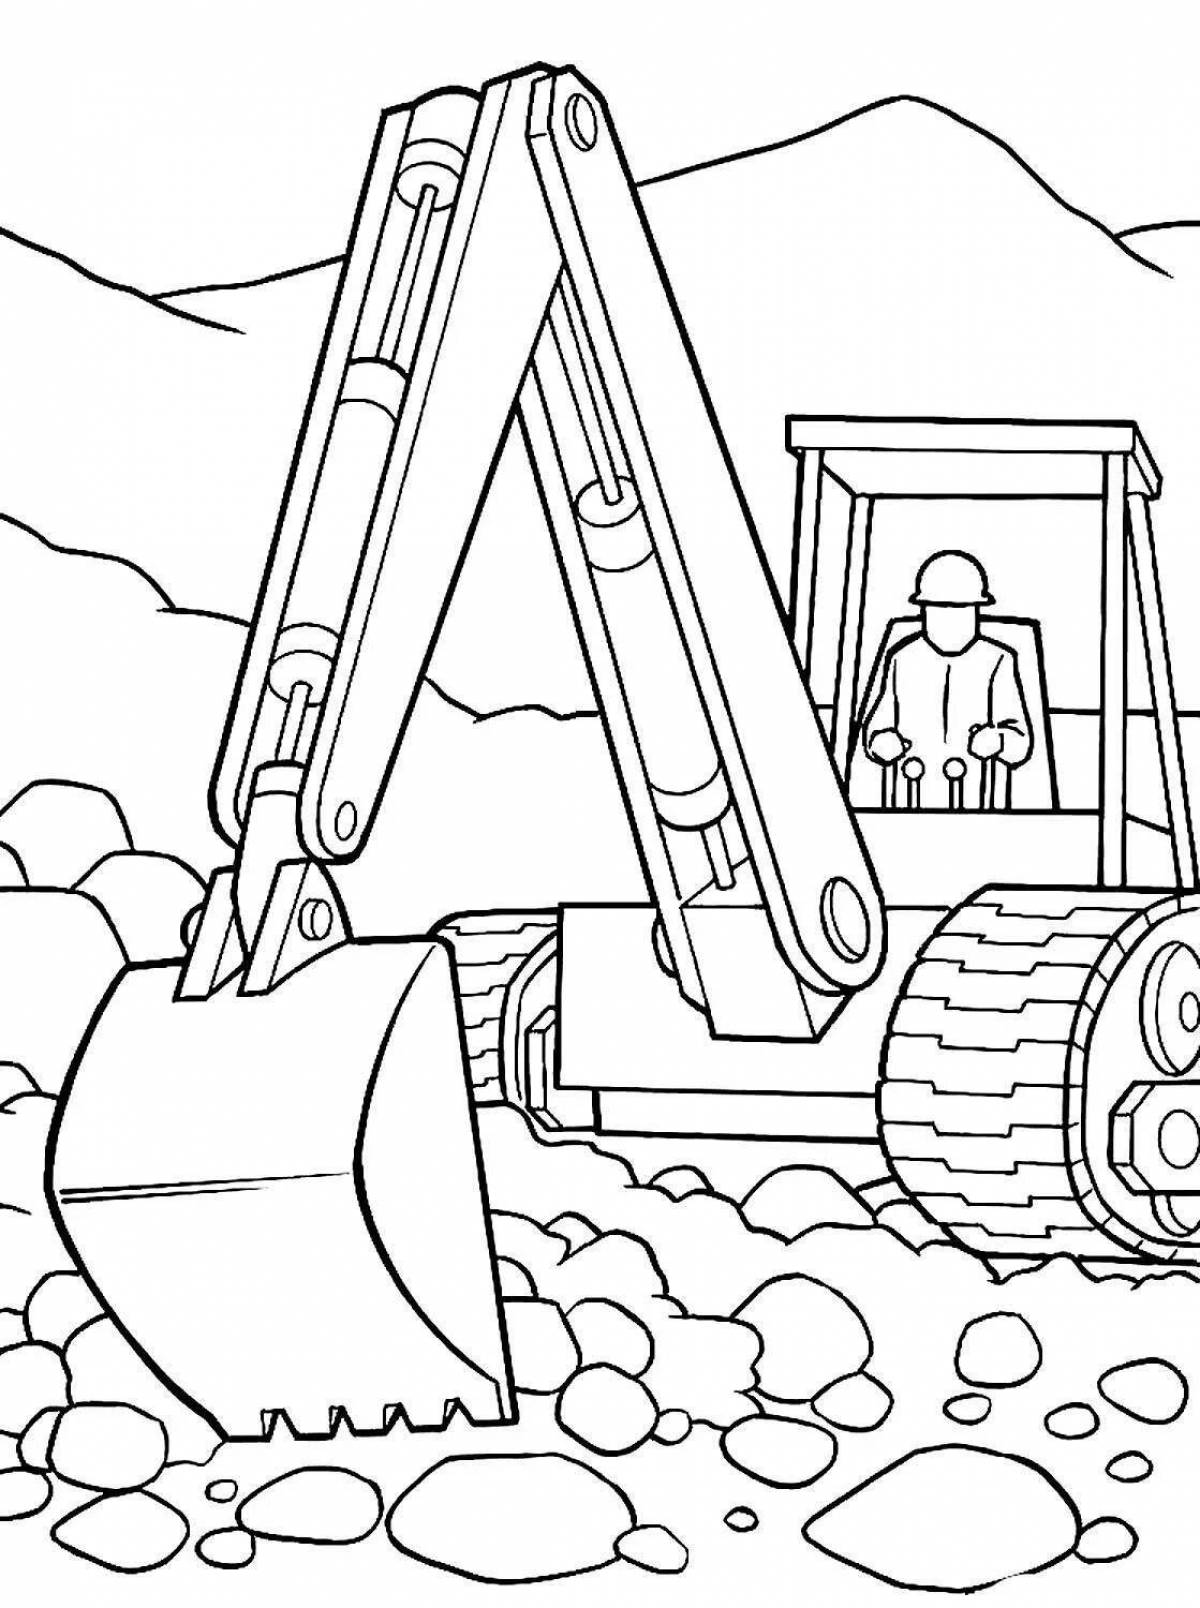 Playful construction machinery coloring page for kids